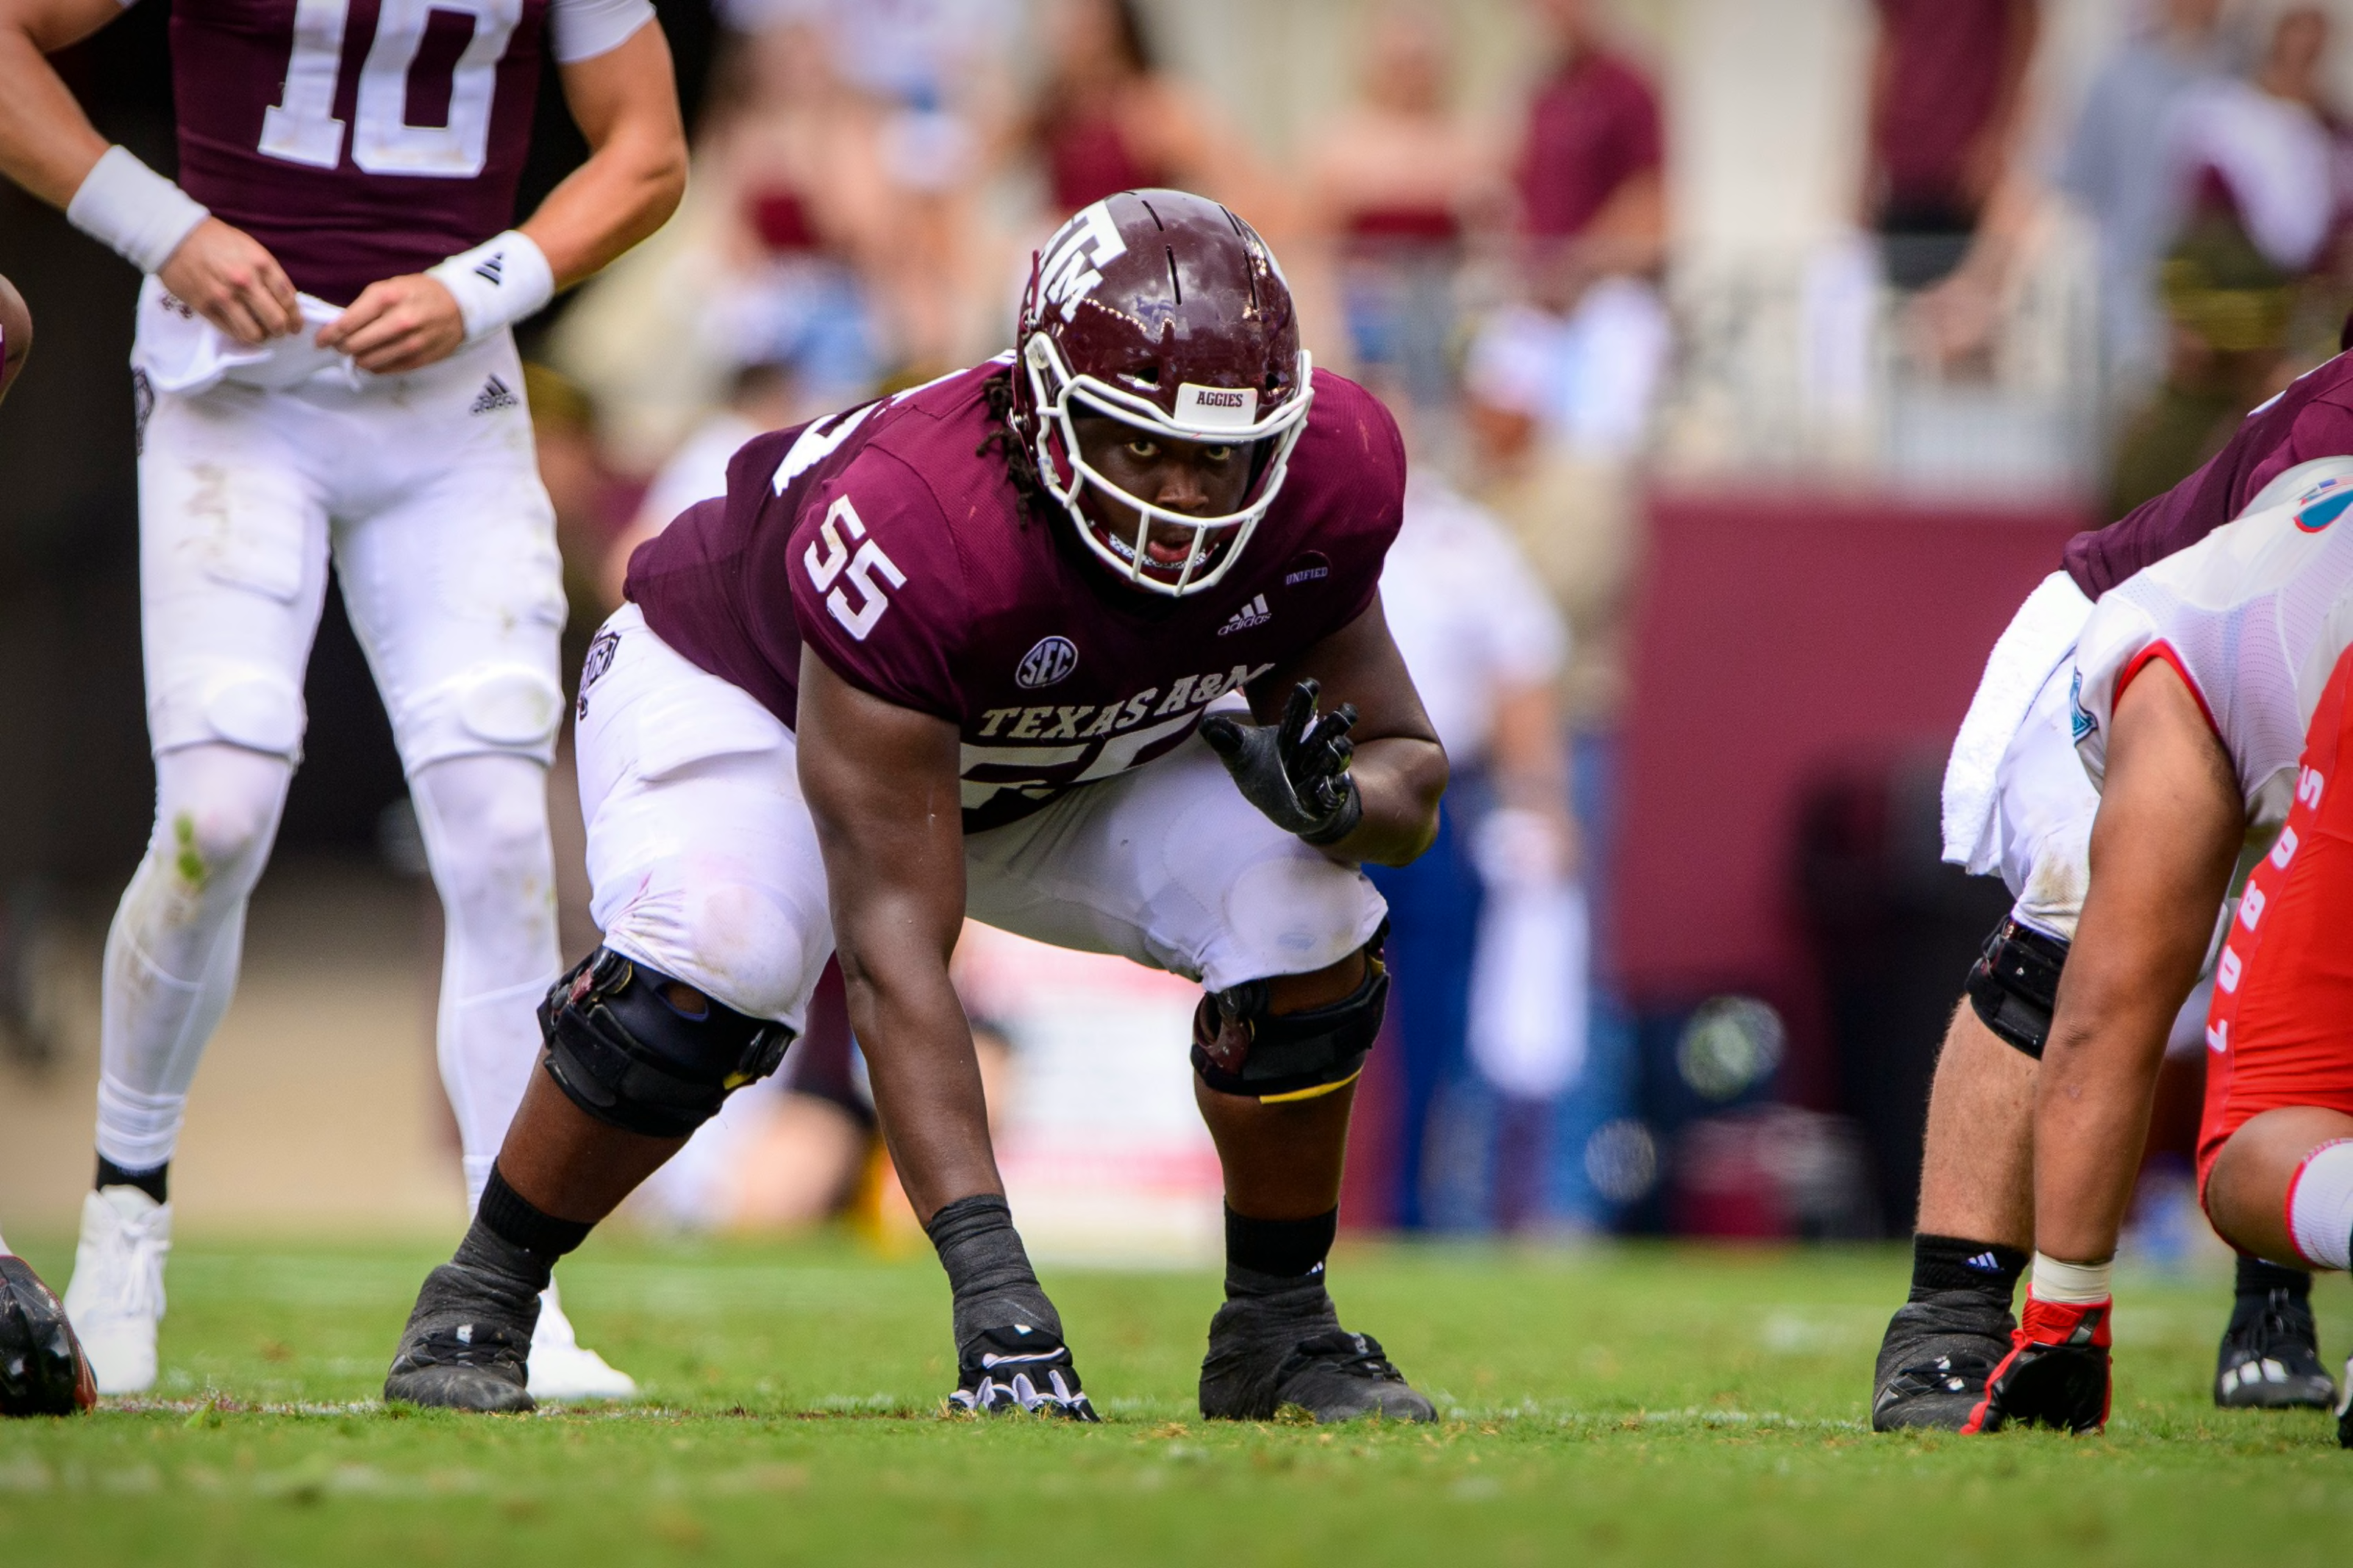 5 potential replacements for Steelers OT Chukwuma Okorafor - Page 2